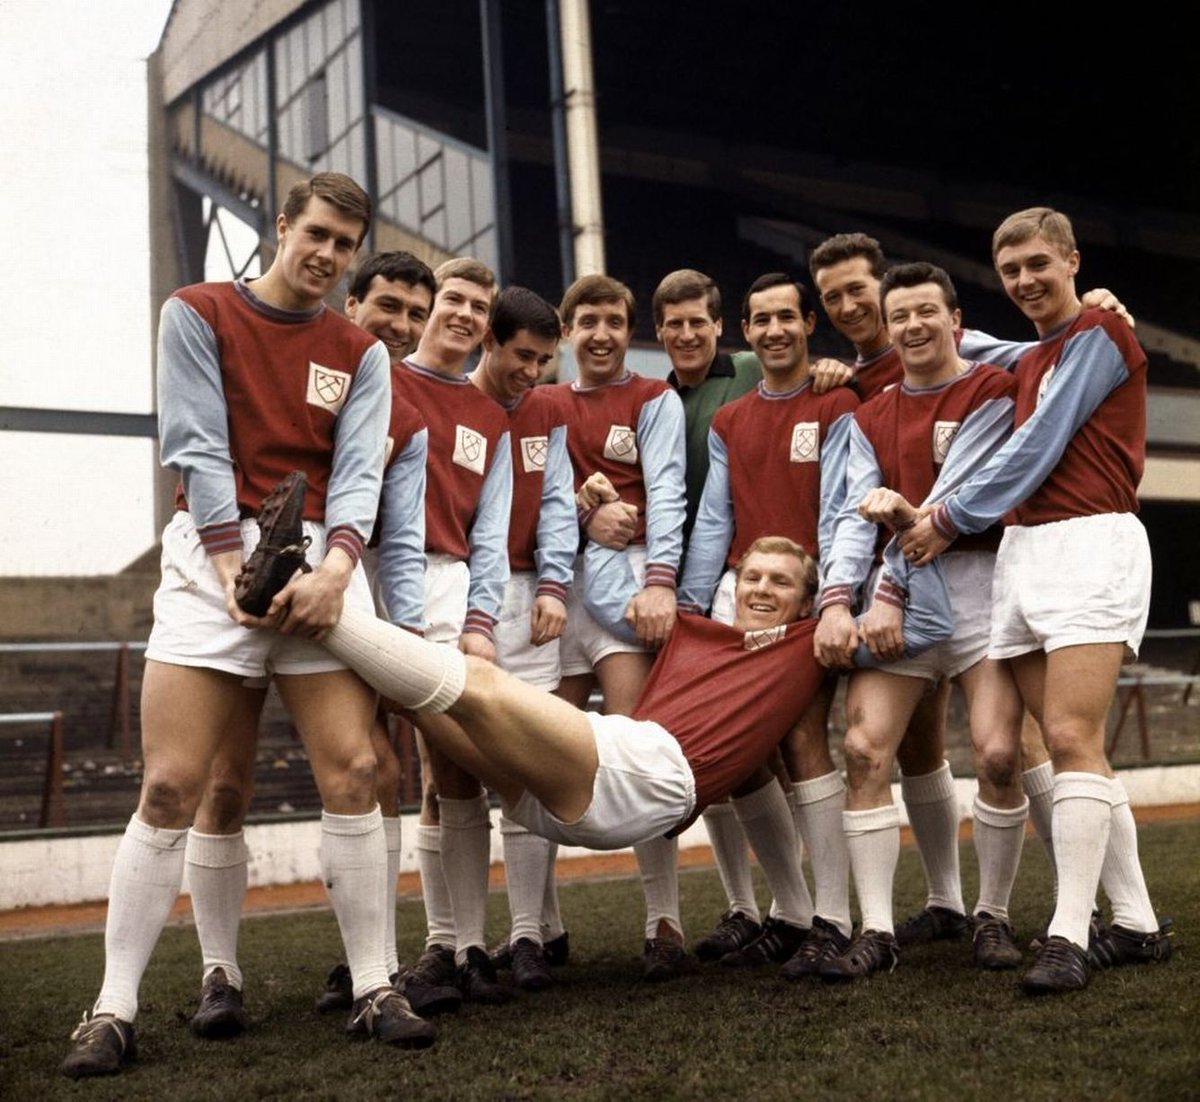 West Ham players looking forward to the 1964 FA Cup Final, which will be 60 years ago tomorrow. Eight of the team came through the Youth Team, seven of the team had surnames beginning with B and all eleven were English ⚒️🏴󠁧󠁢󠁥󠁮󠁧󠁿